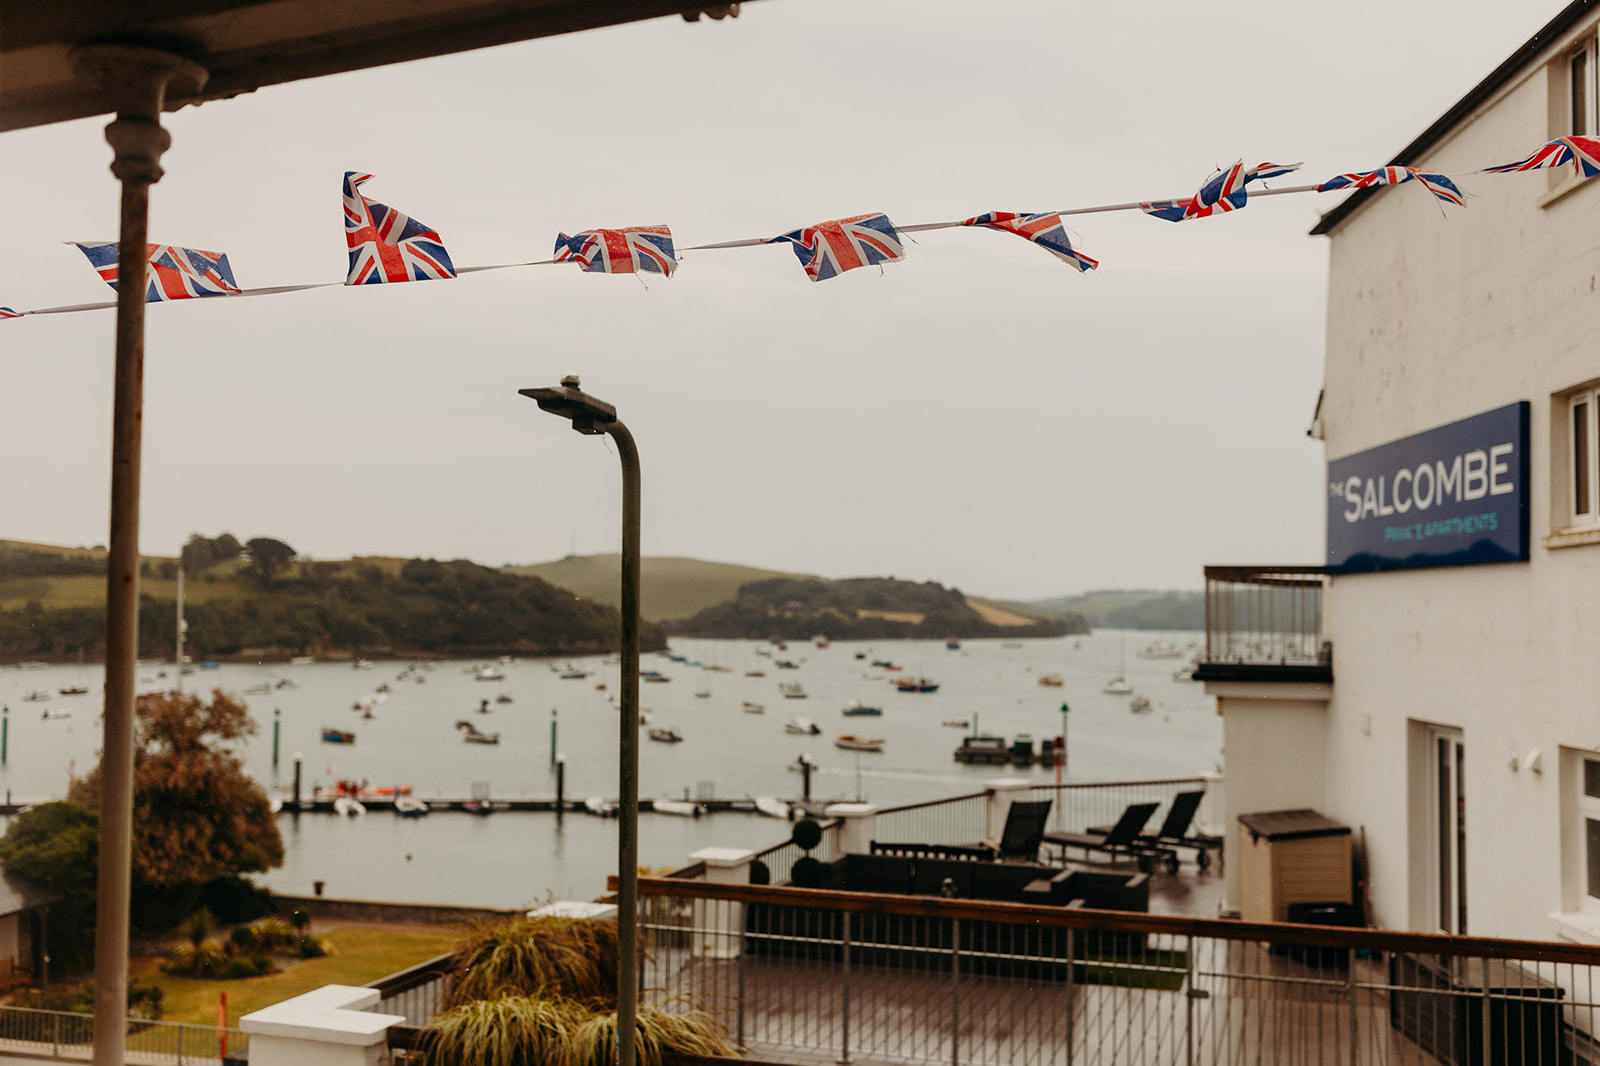 Salcombe on morning of a misty wedding, british flags wave in foreground, boats dot the water landscape in background